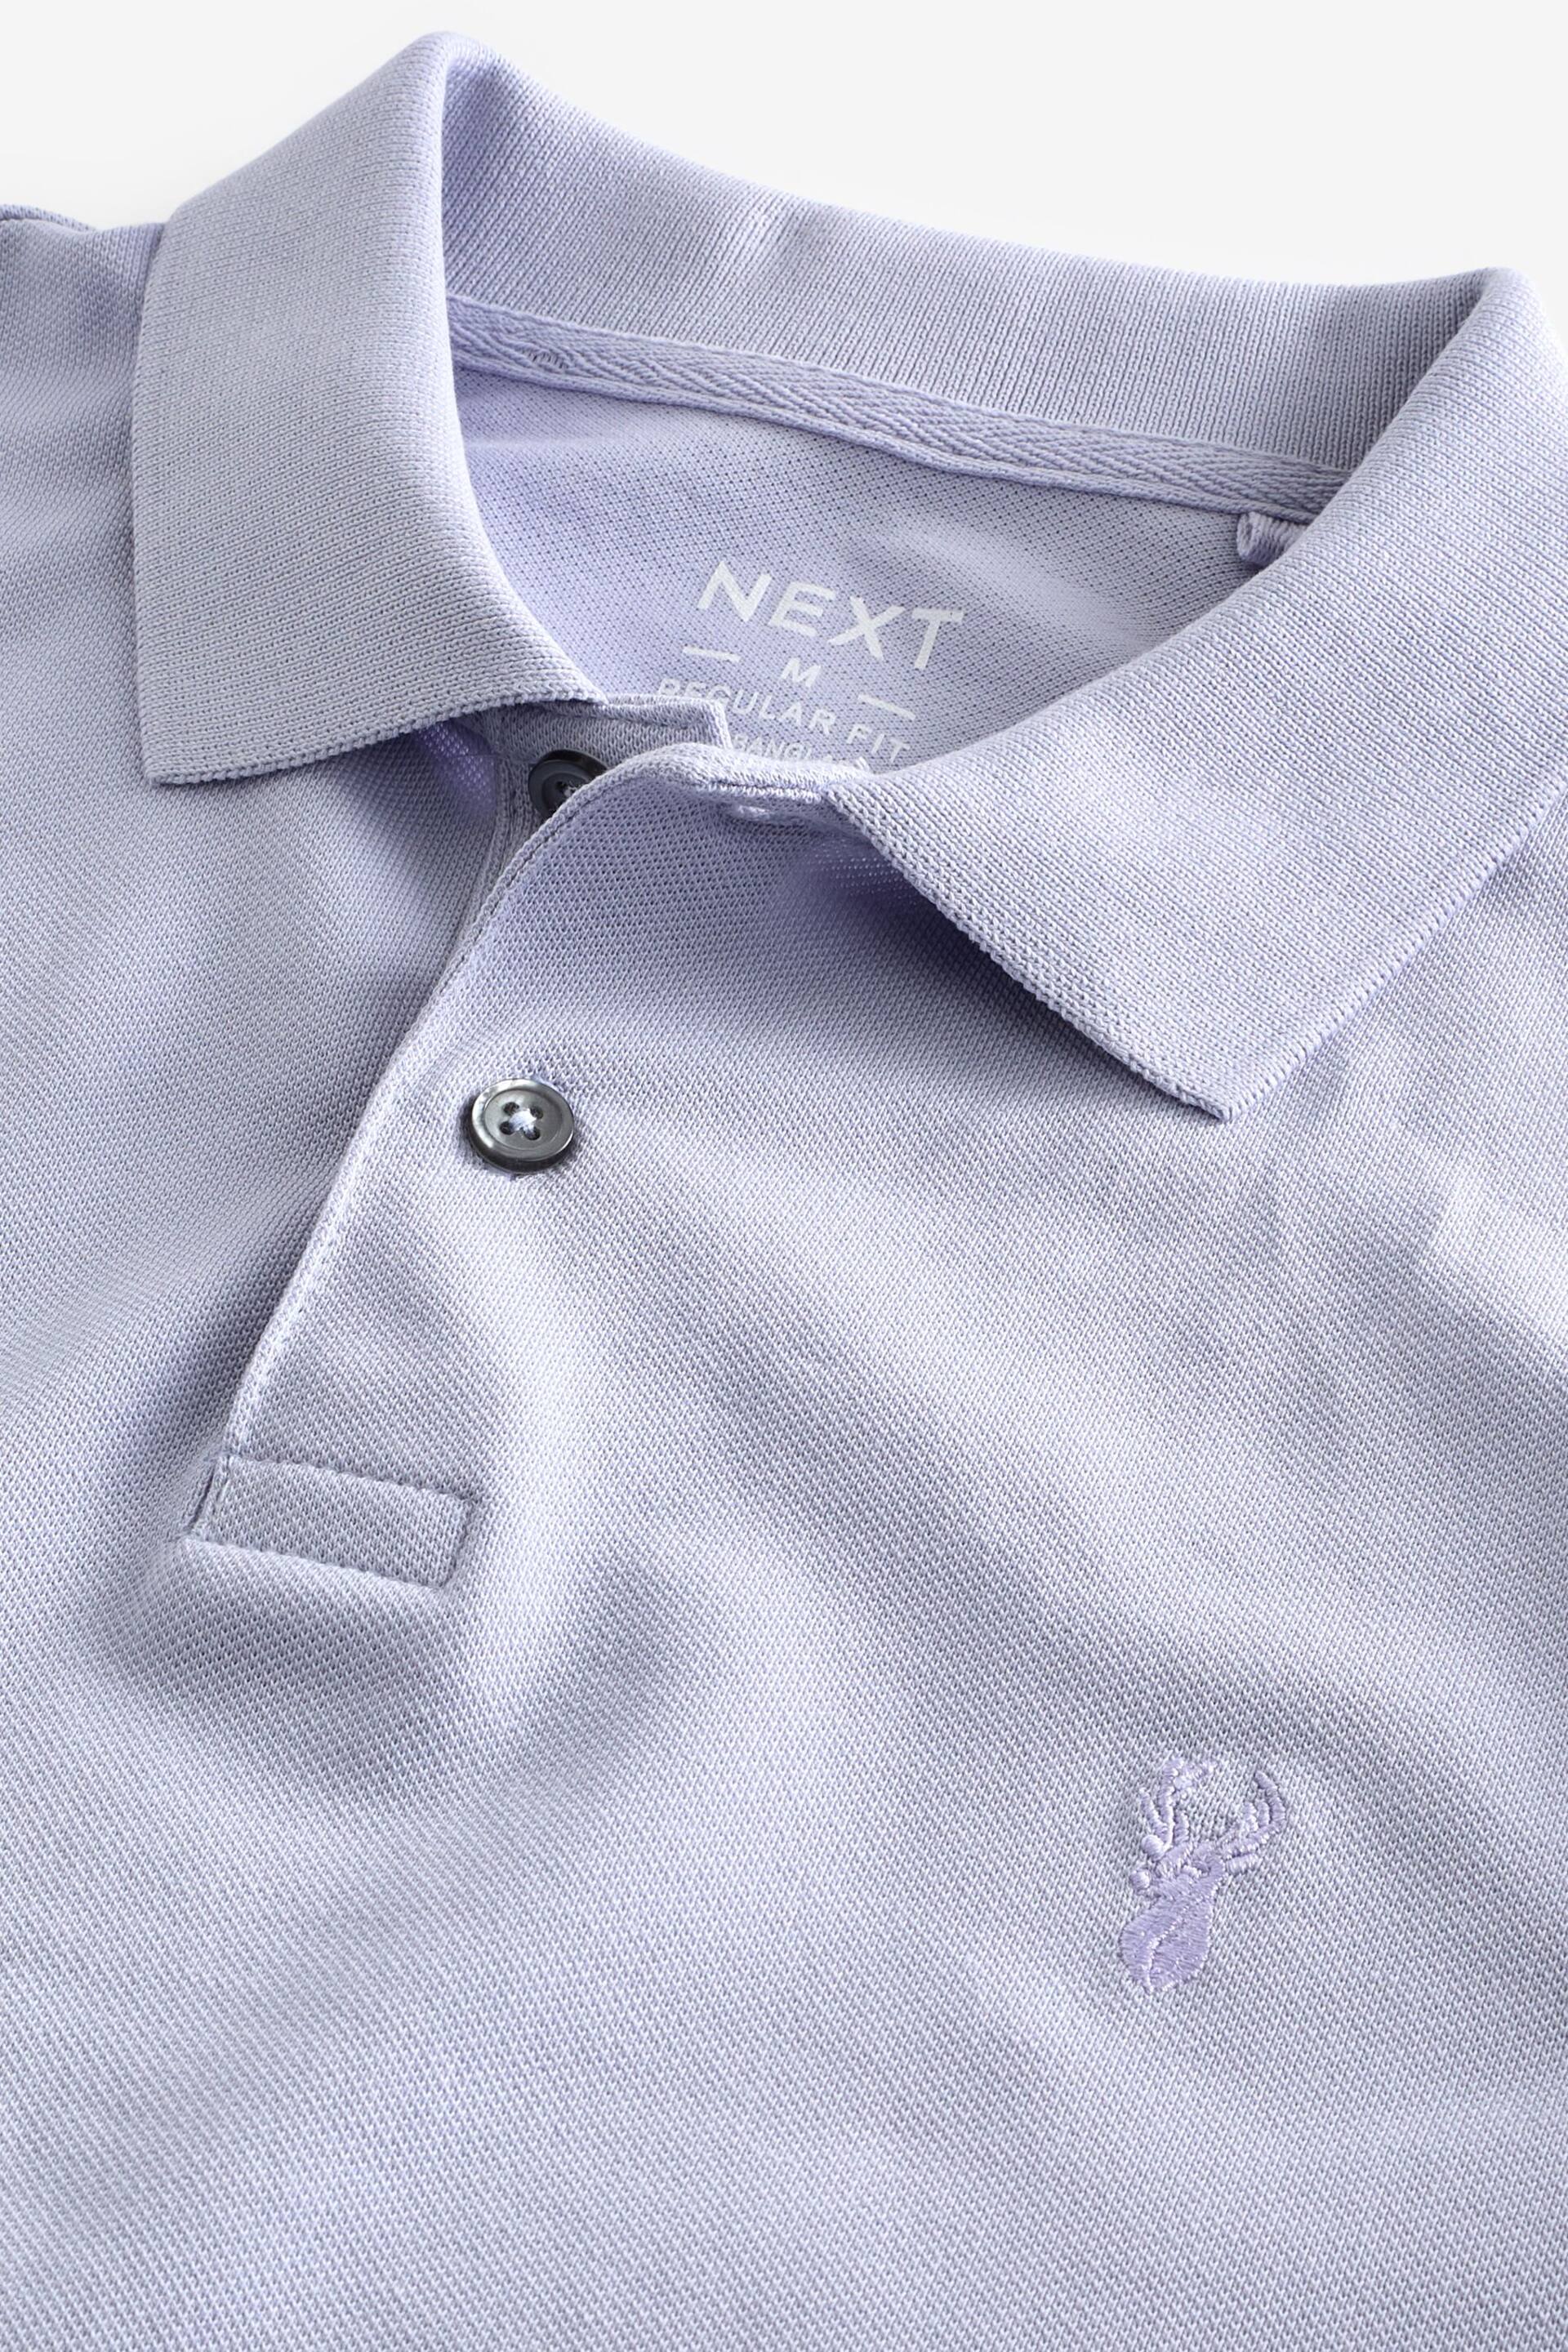 Purple Lilac Regular Fit Short Sleeve Pique Polo Shirt - Image 7 of 8